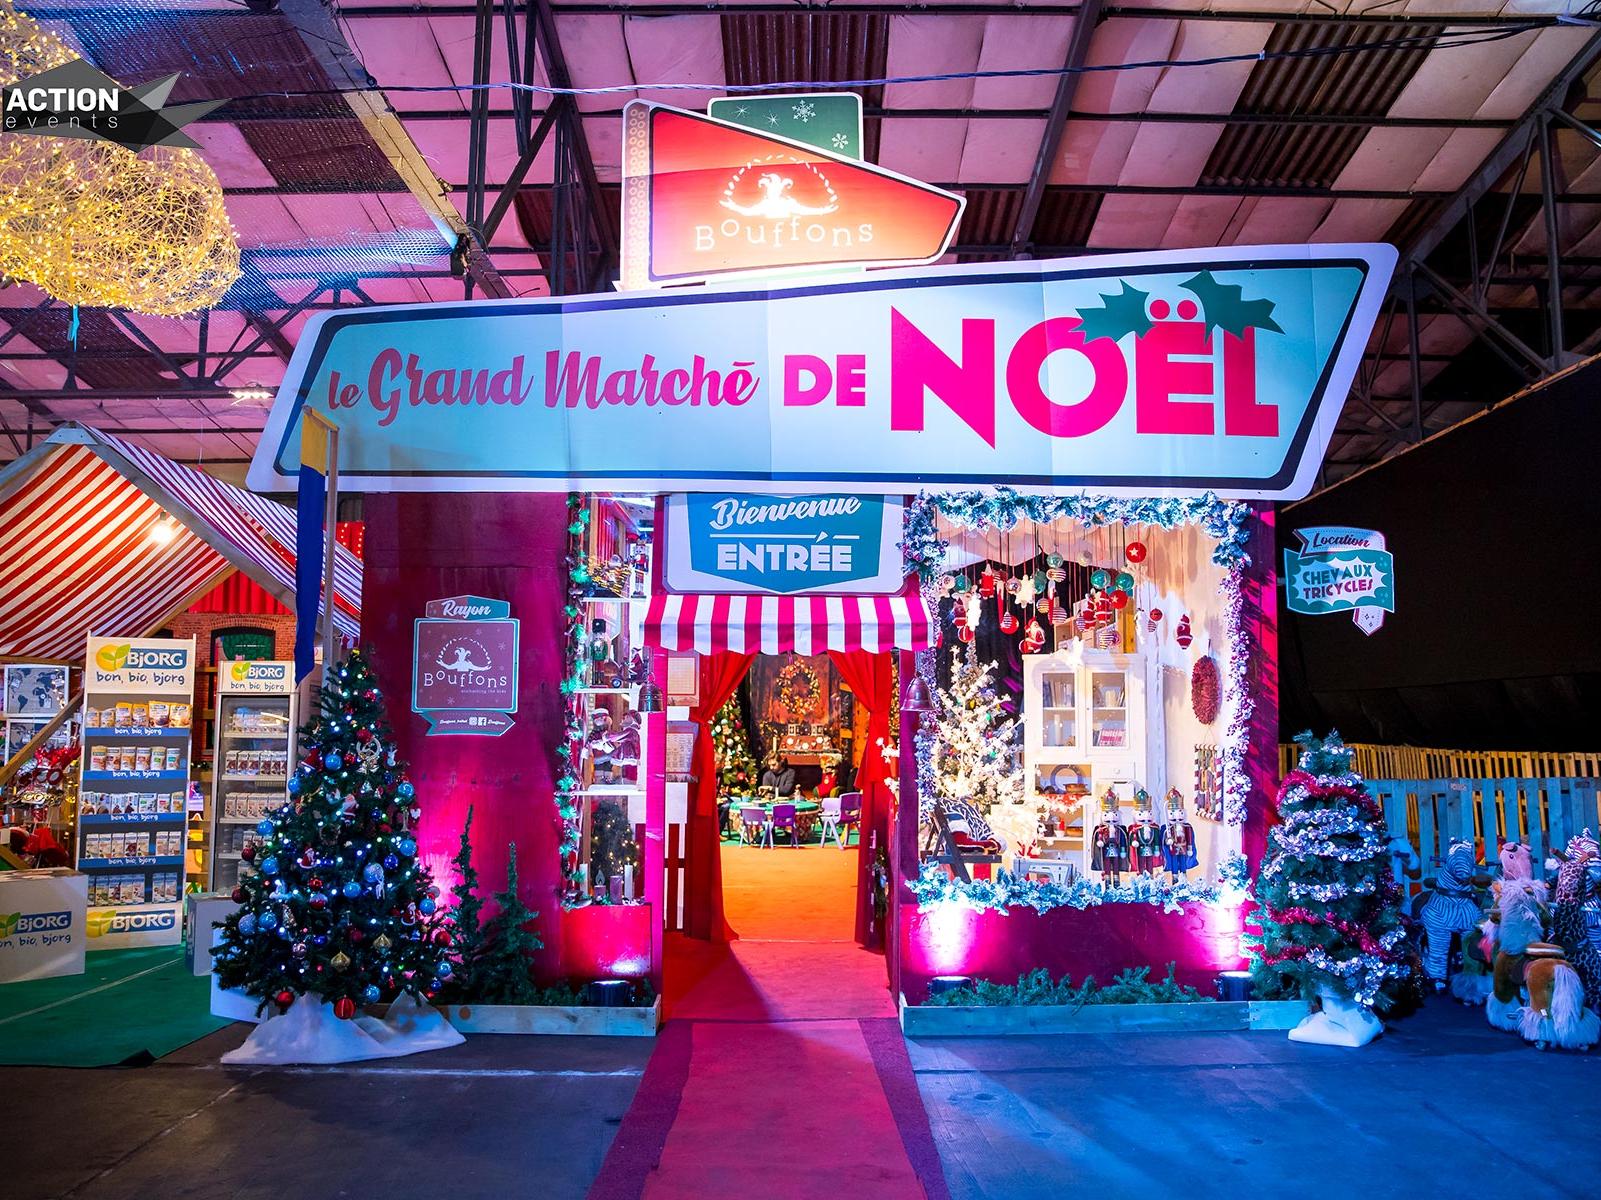 "Christmas in Action 2018": The largest Christmas market in Lebanon